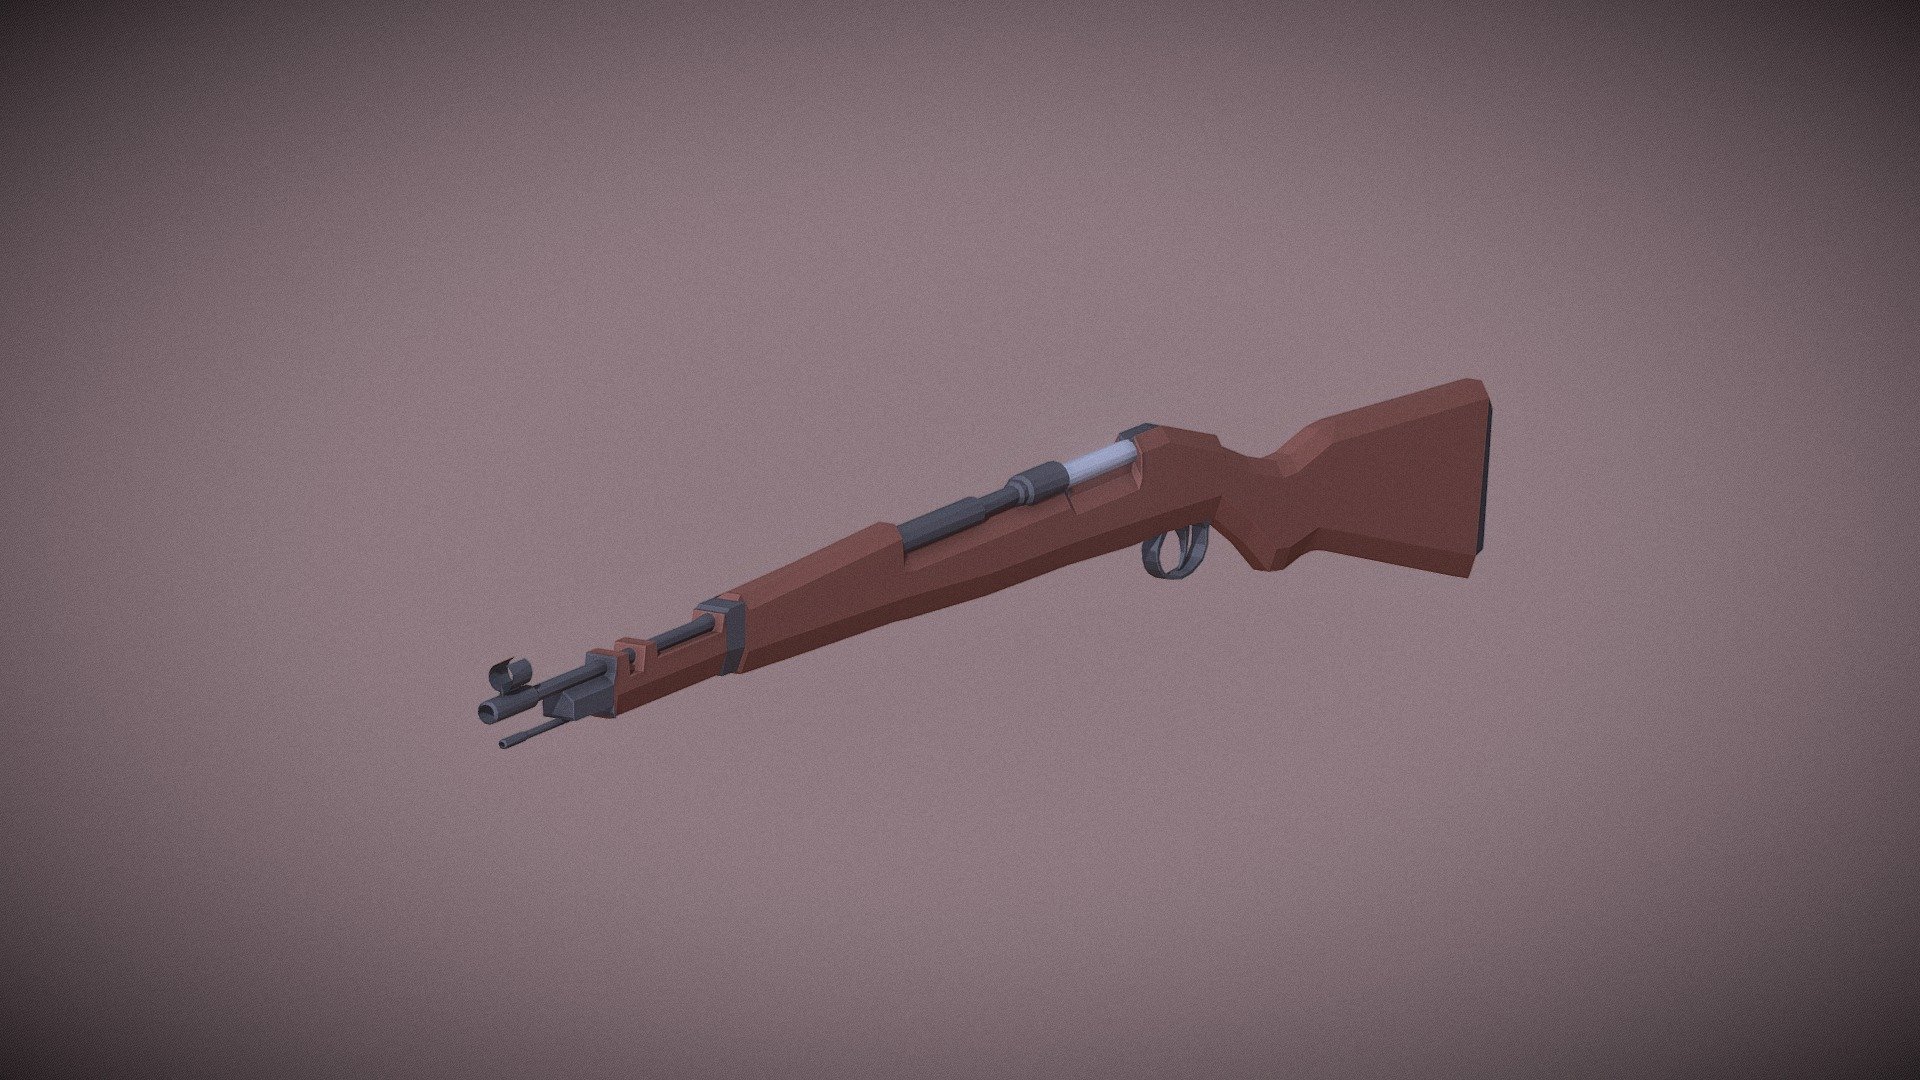 A low poly cartoon model of a Kar 98 German Rifle.
Modelled in Blender.
Materials are applied through Blender 3d model